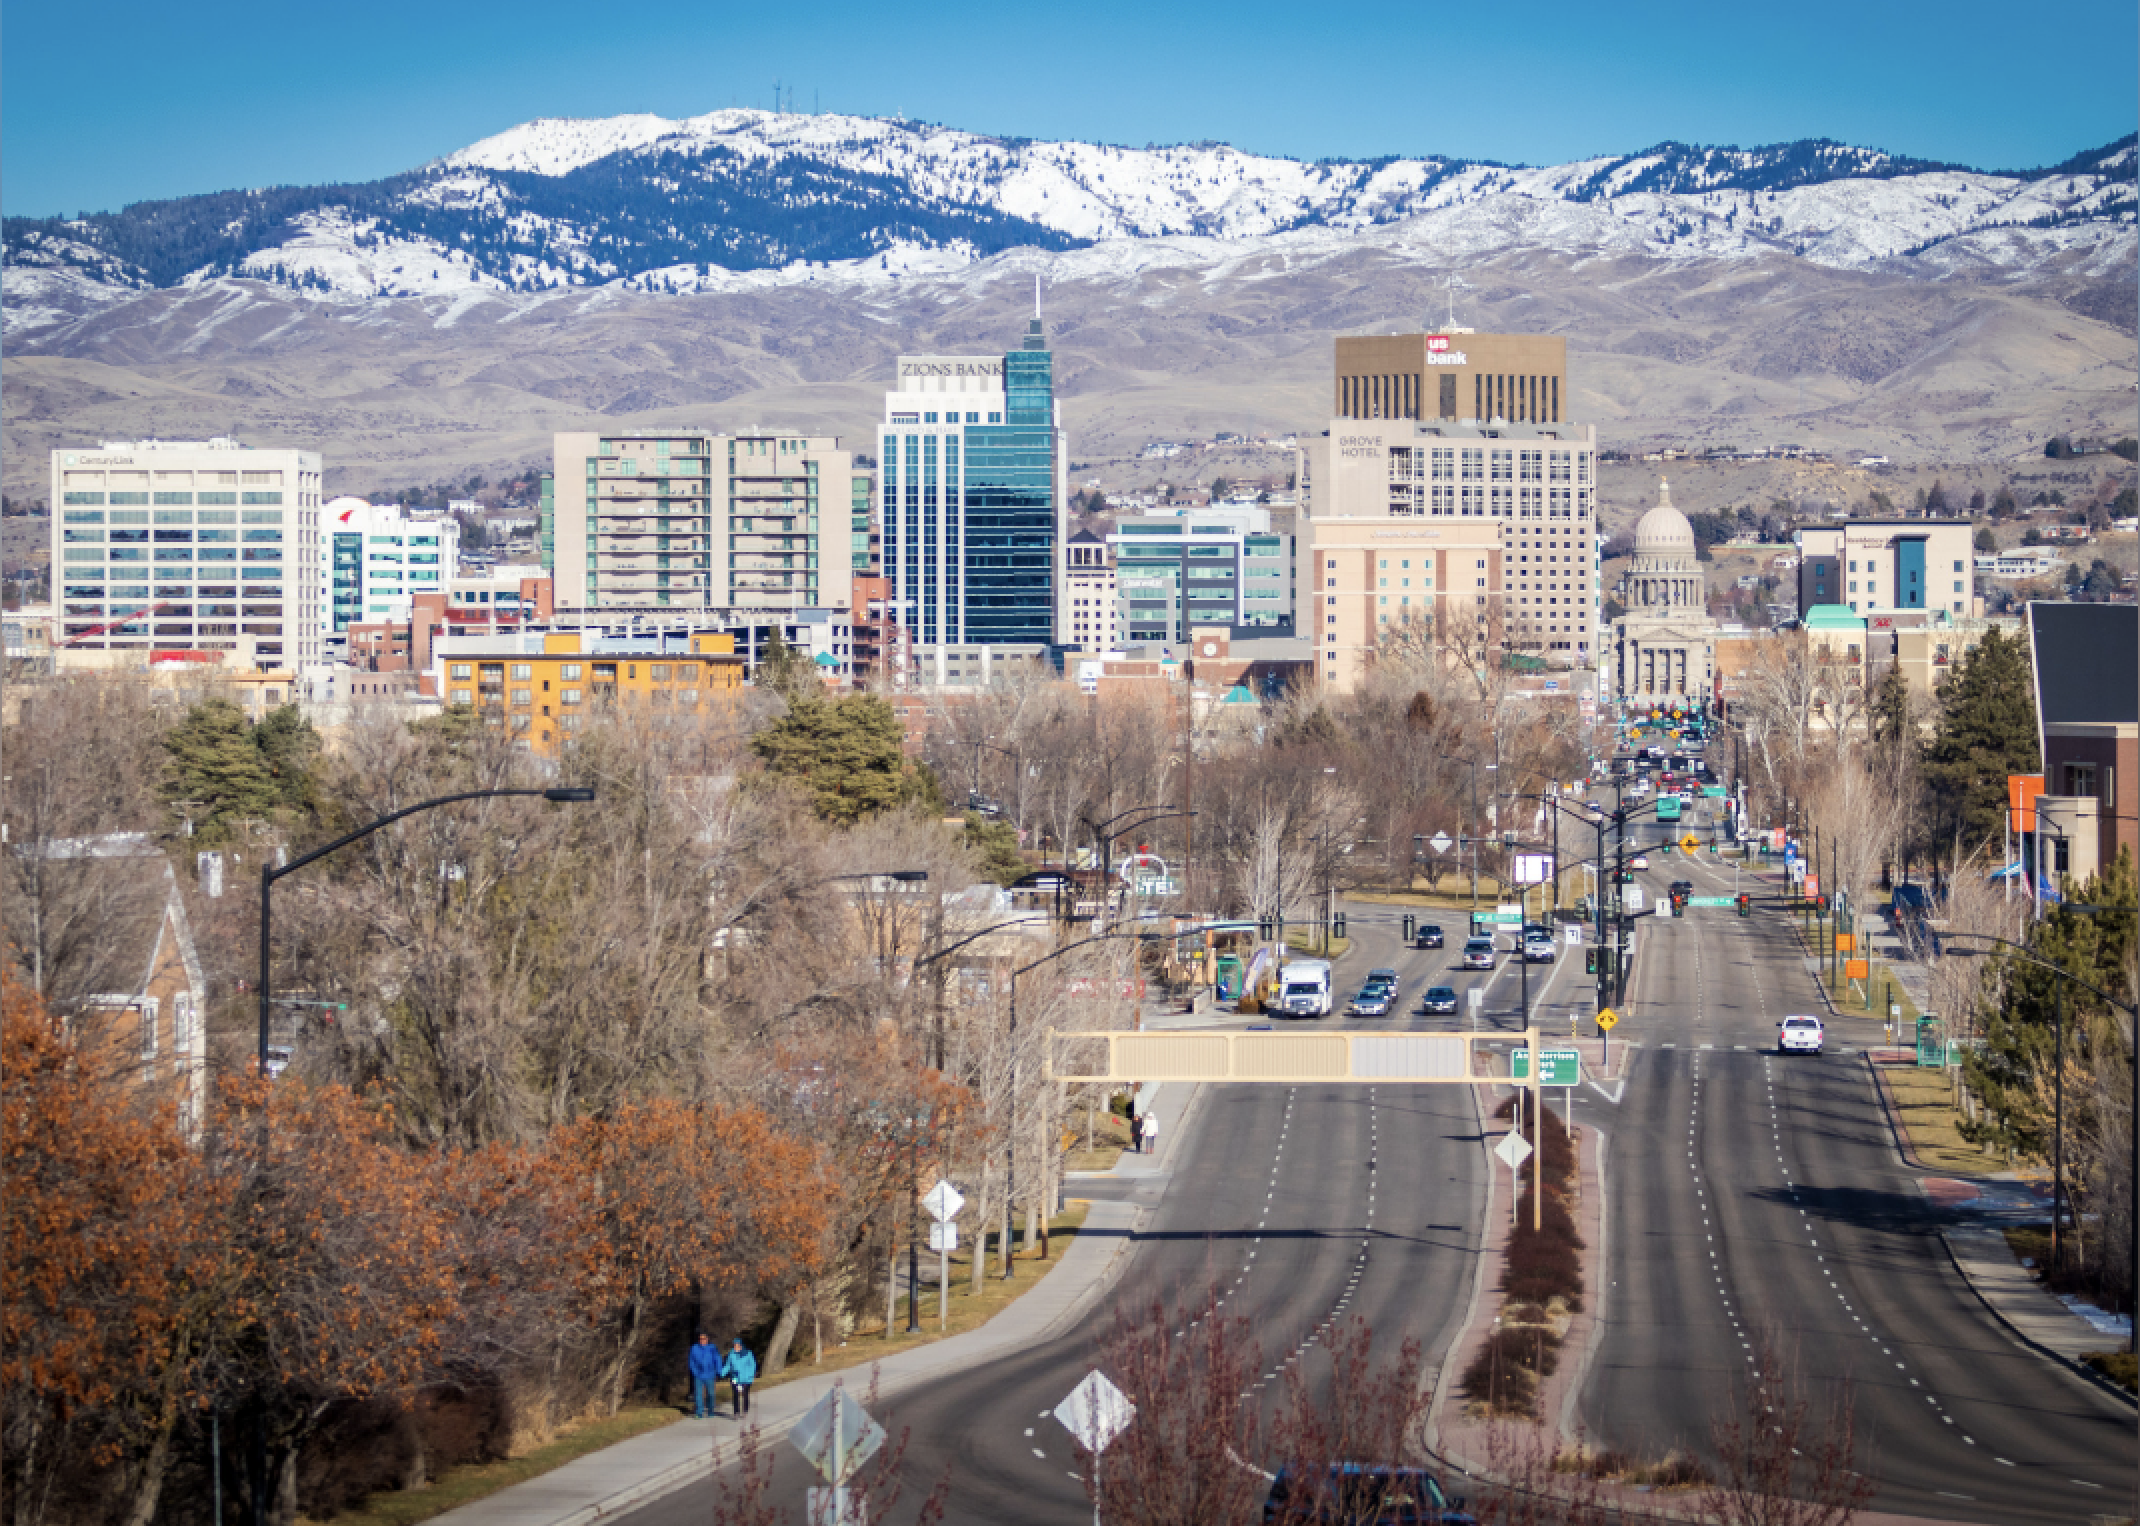 The Boise skyline with snowy mountains in the background.